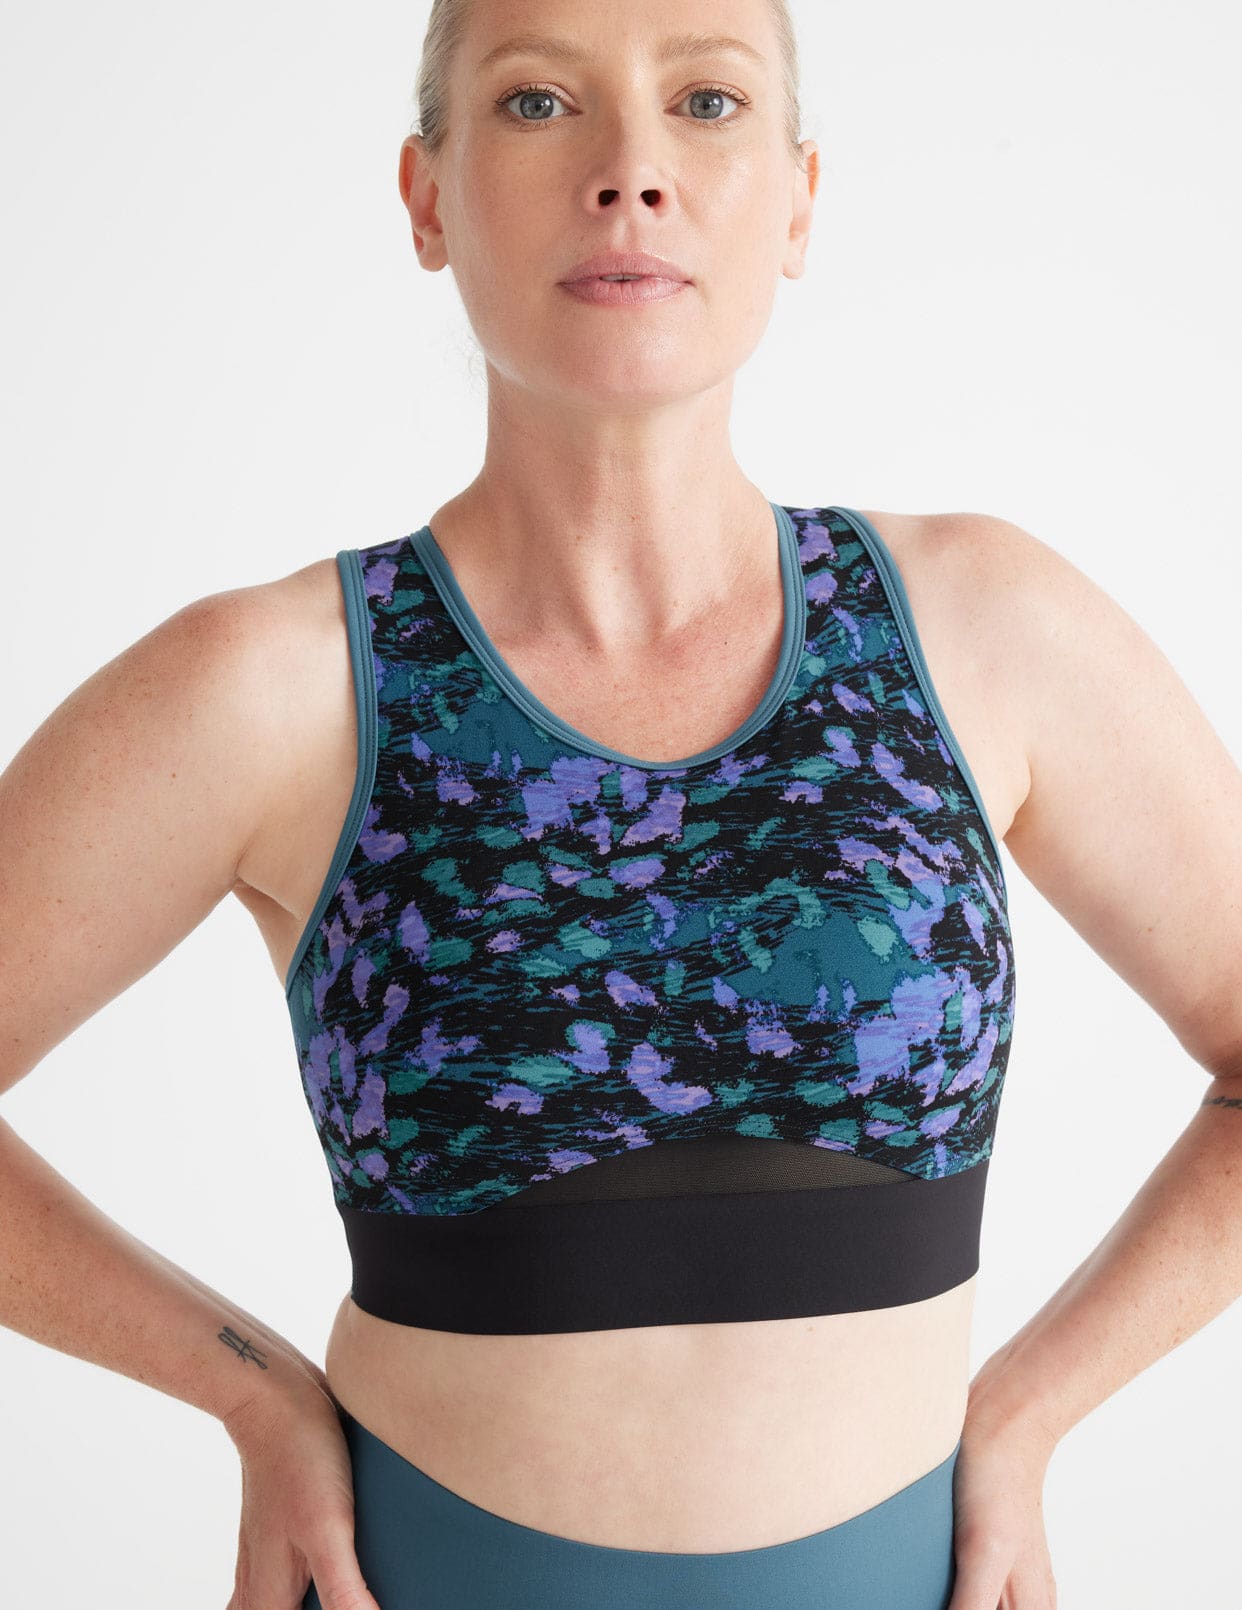 The 7 Best New Sports Bras for Every Type of Workout